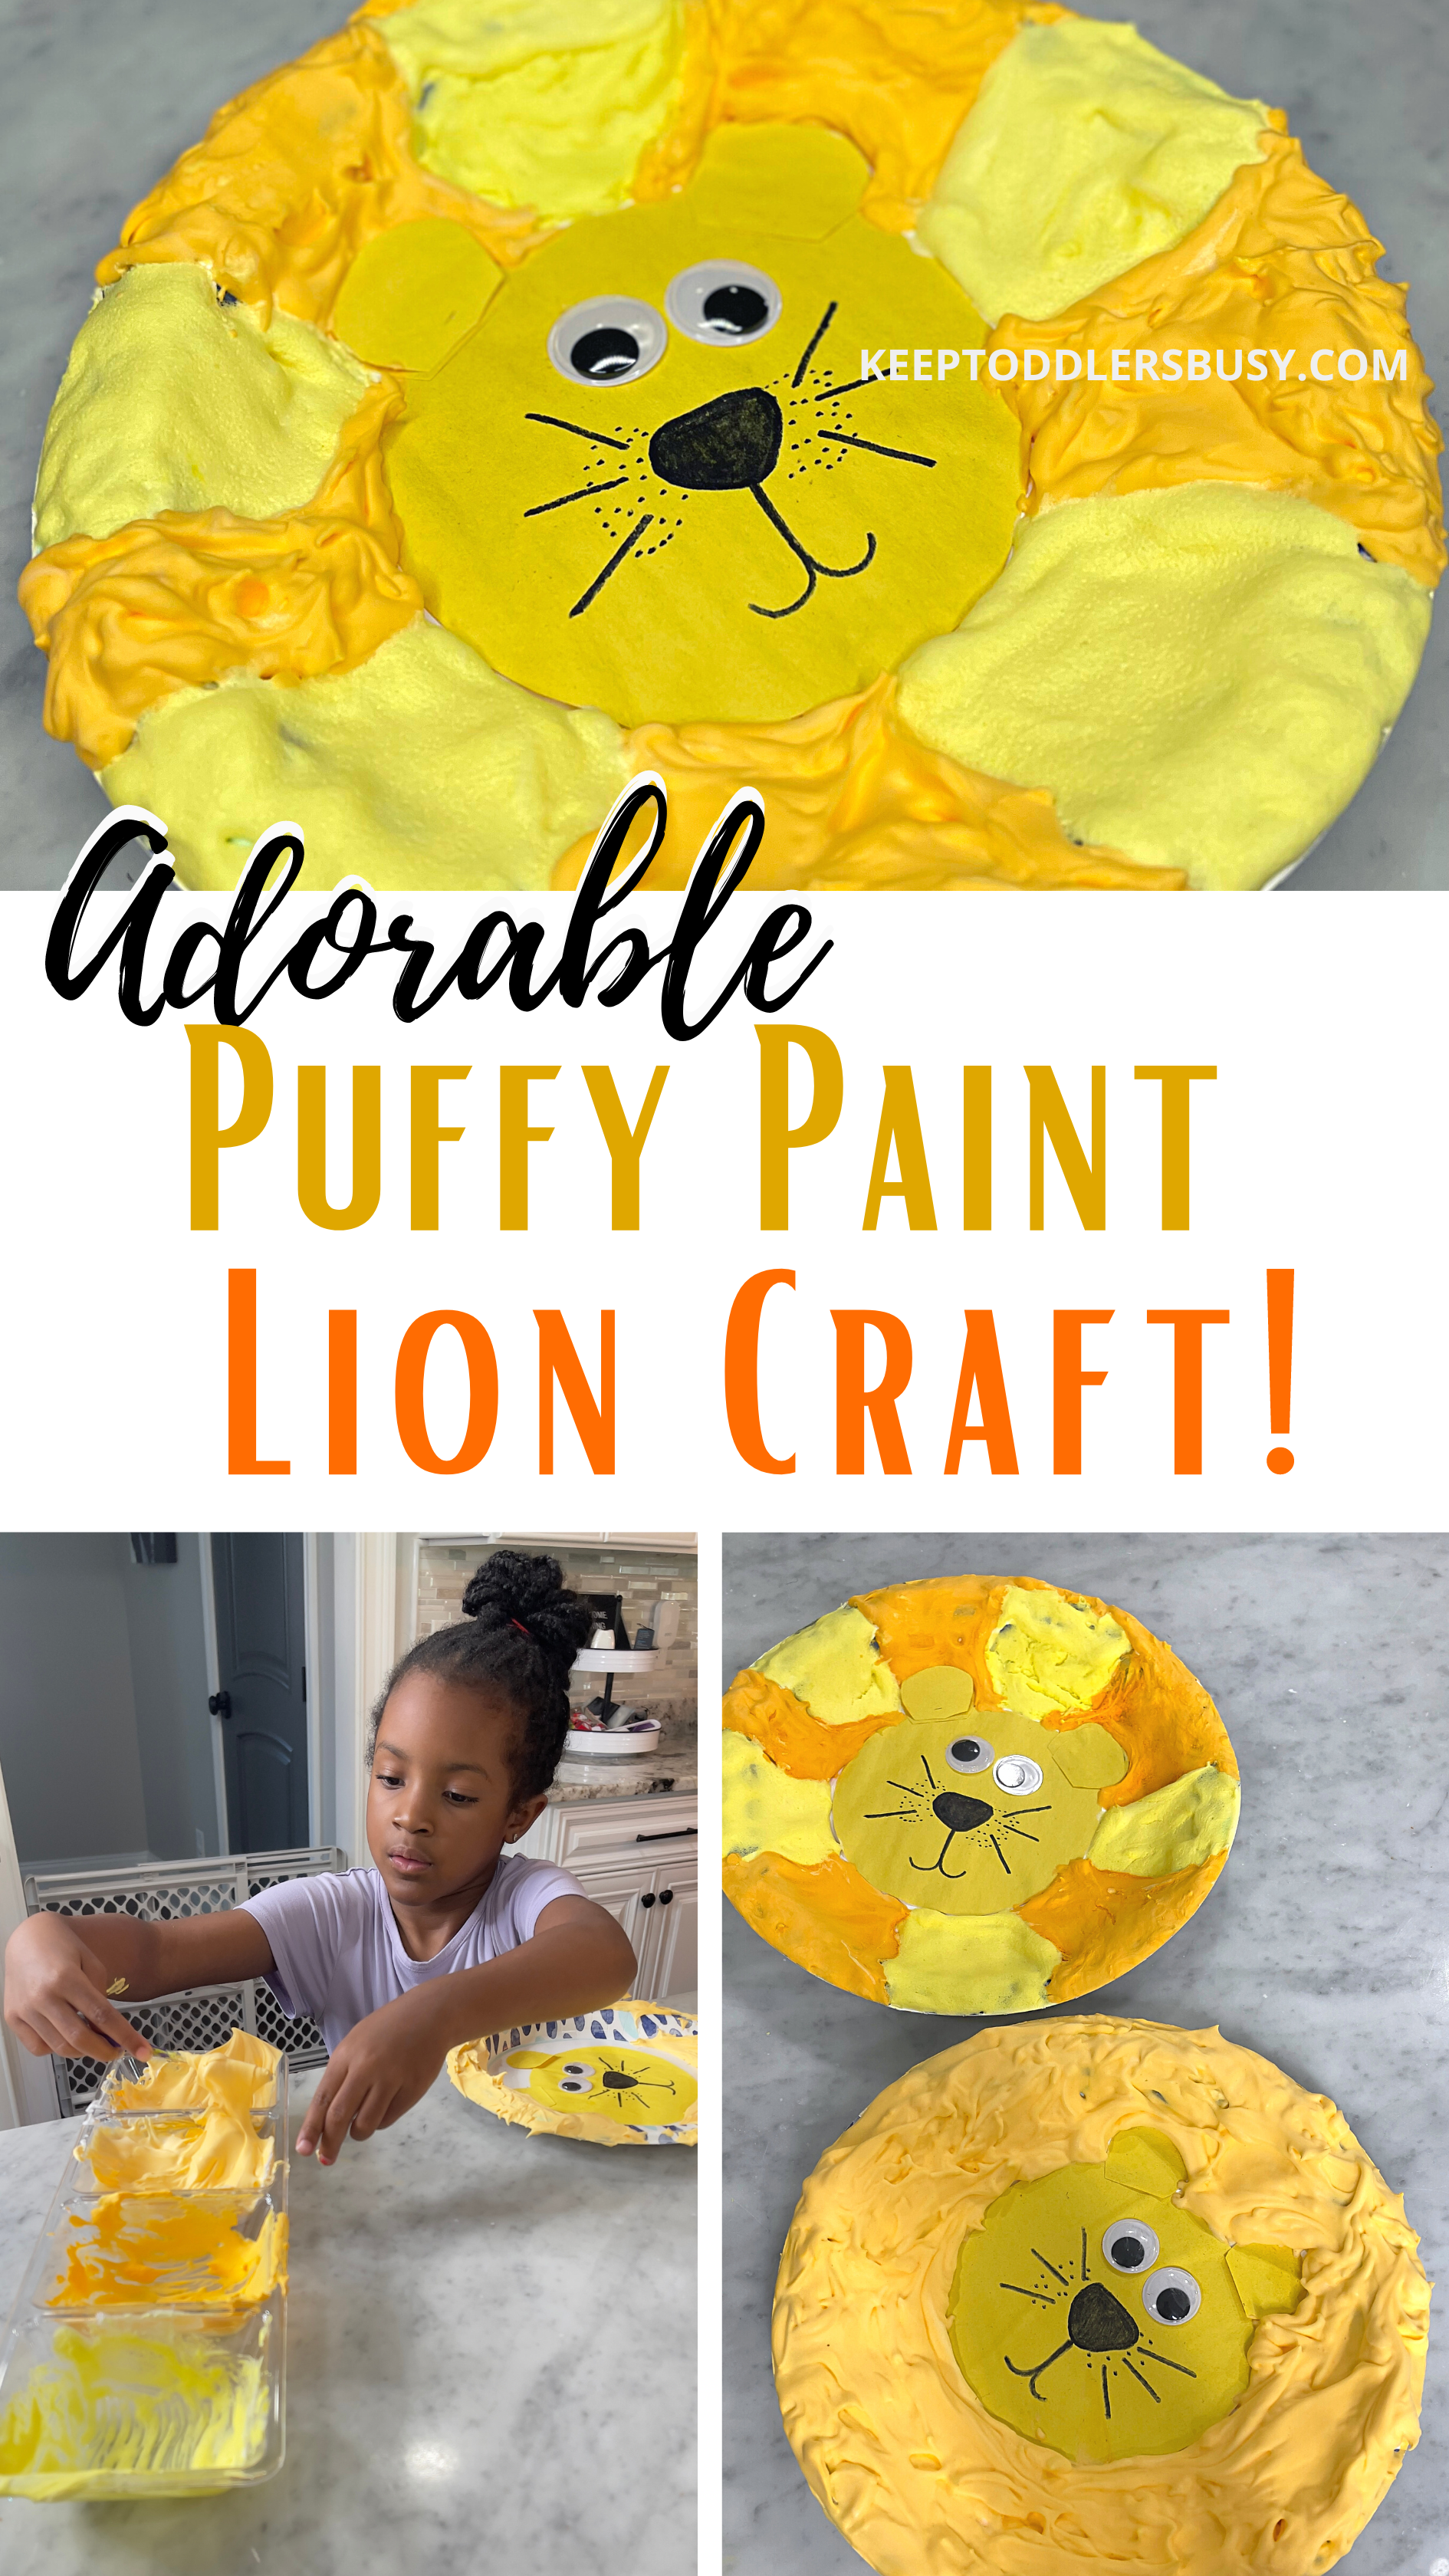 How to Make Puffy Paint  Puffy paint crafts, Crafts for kids